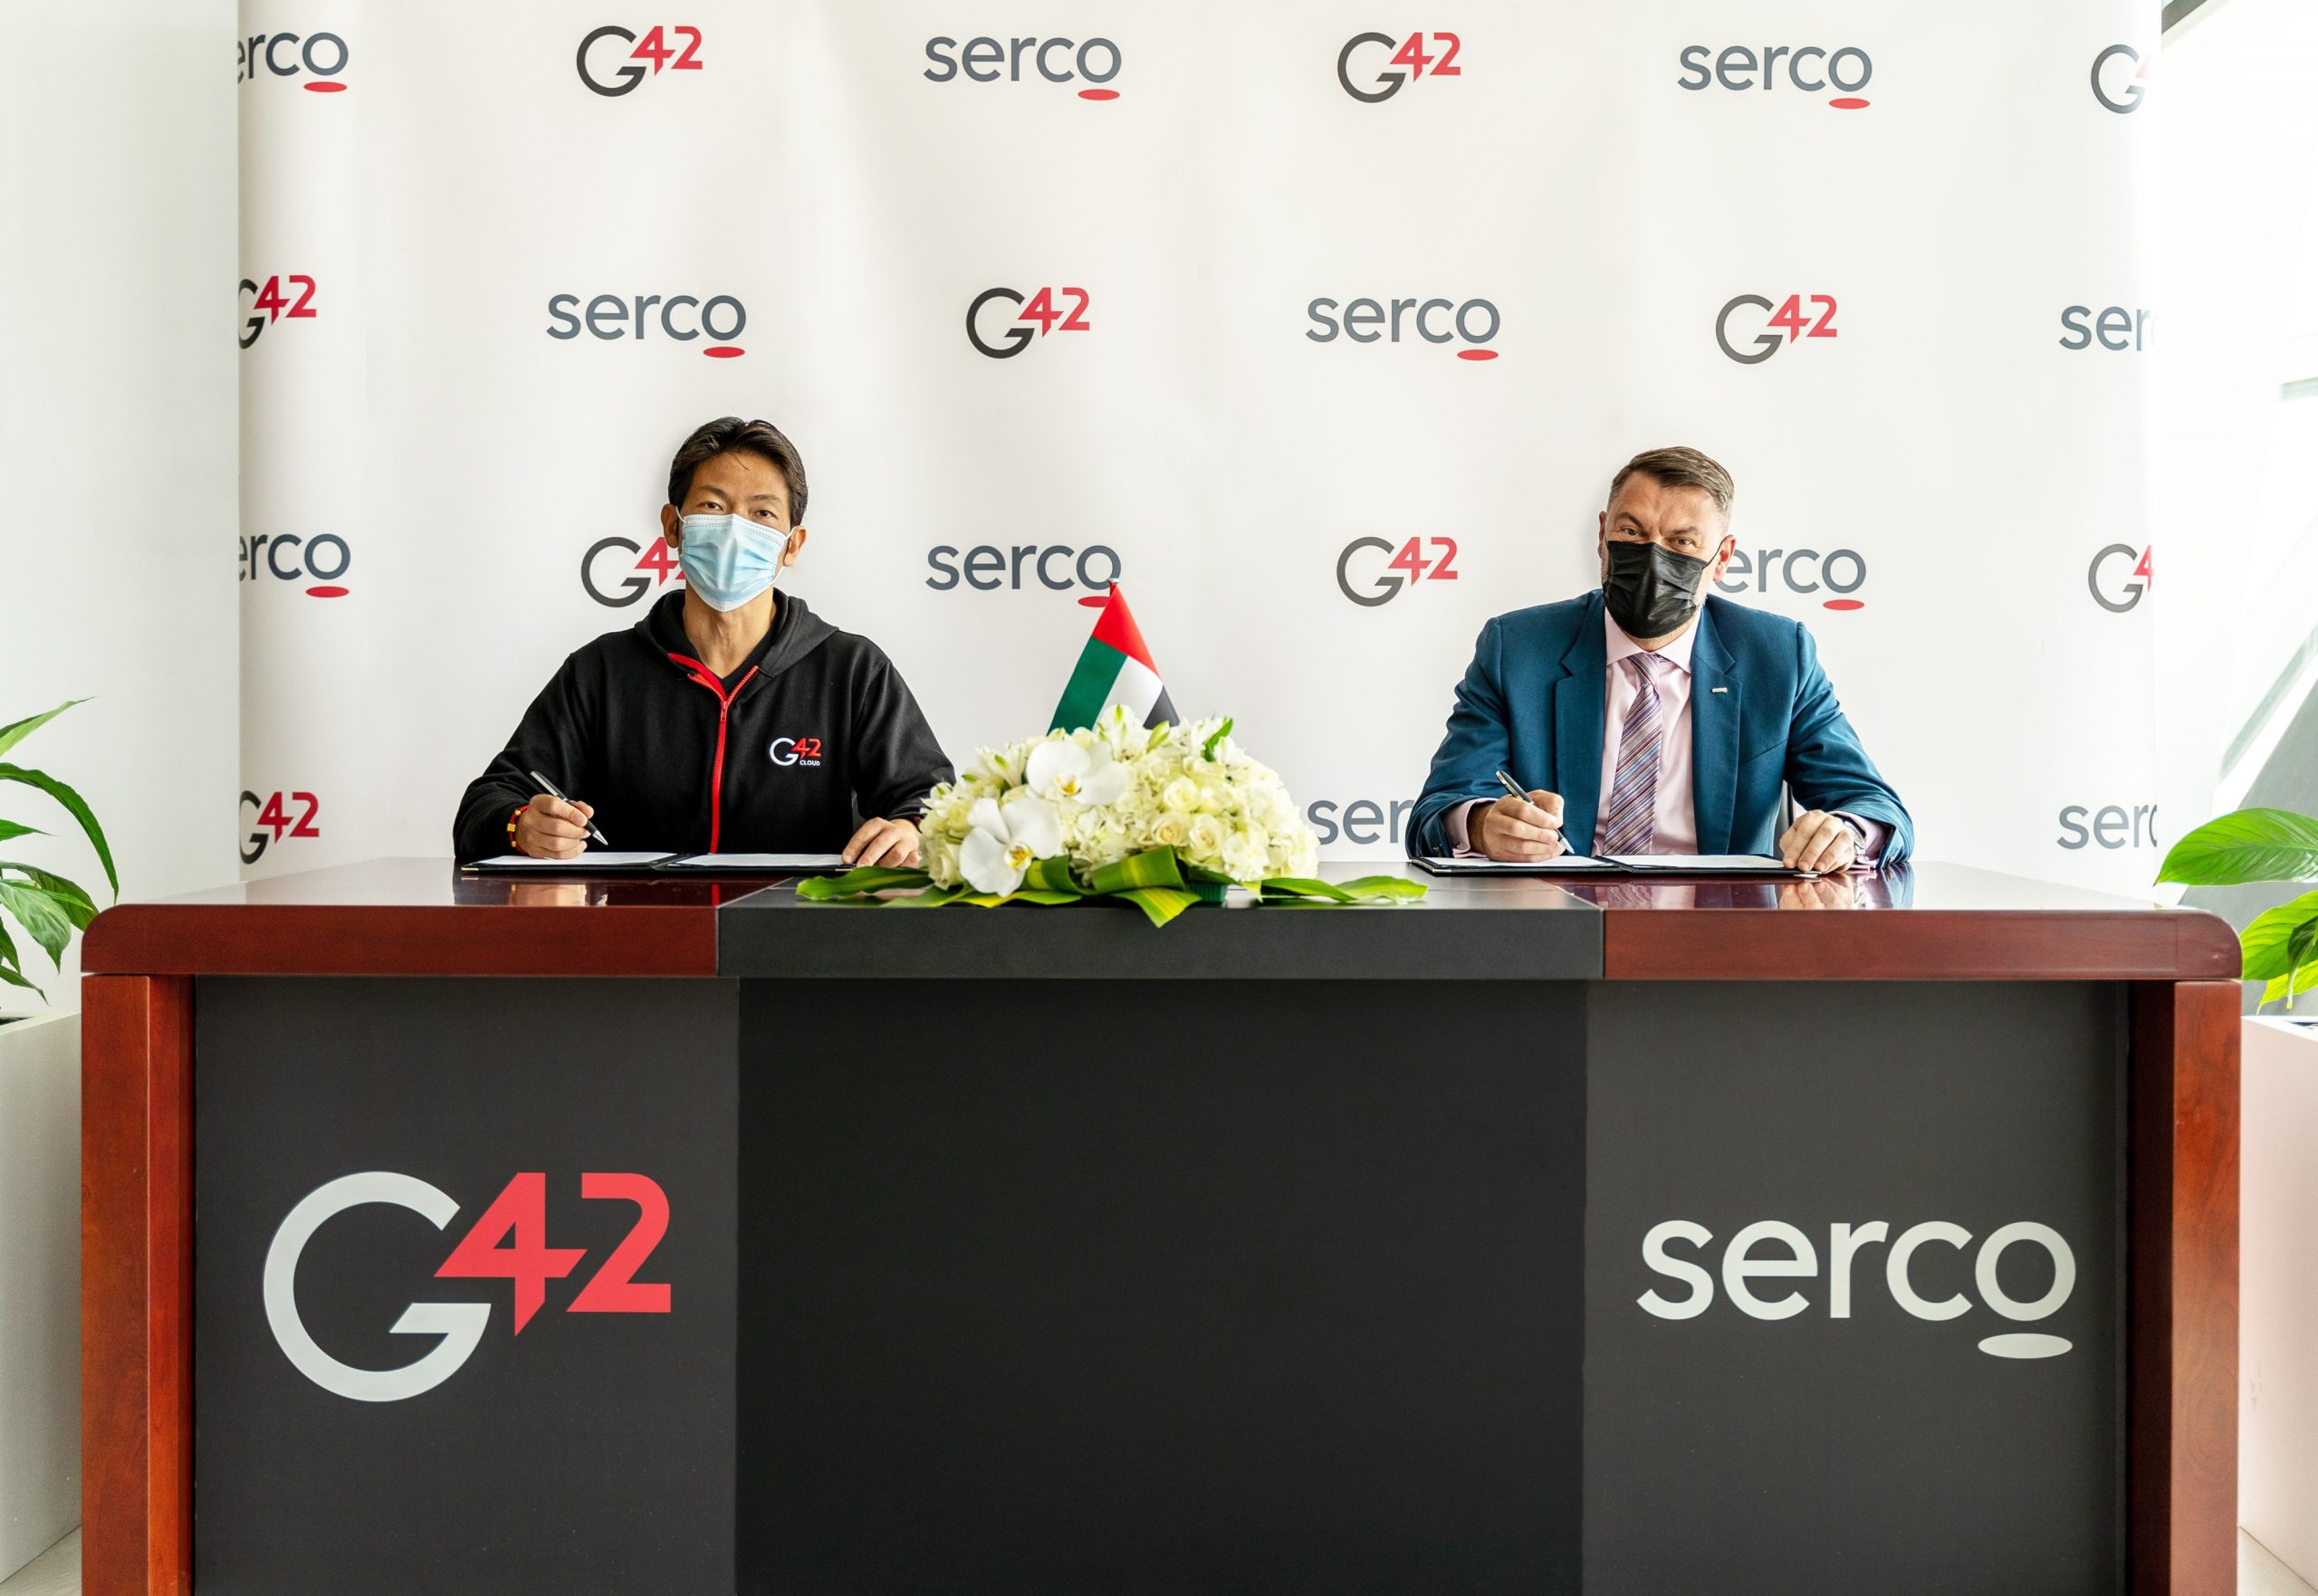 Serco Middle East And G42 Join Forces To Transform And Deliver Fully Integrated Public Services Across The Region